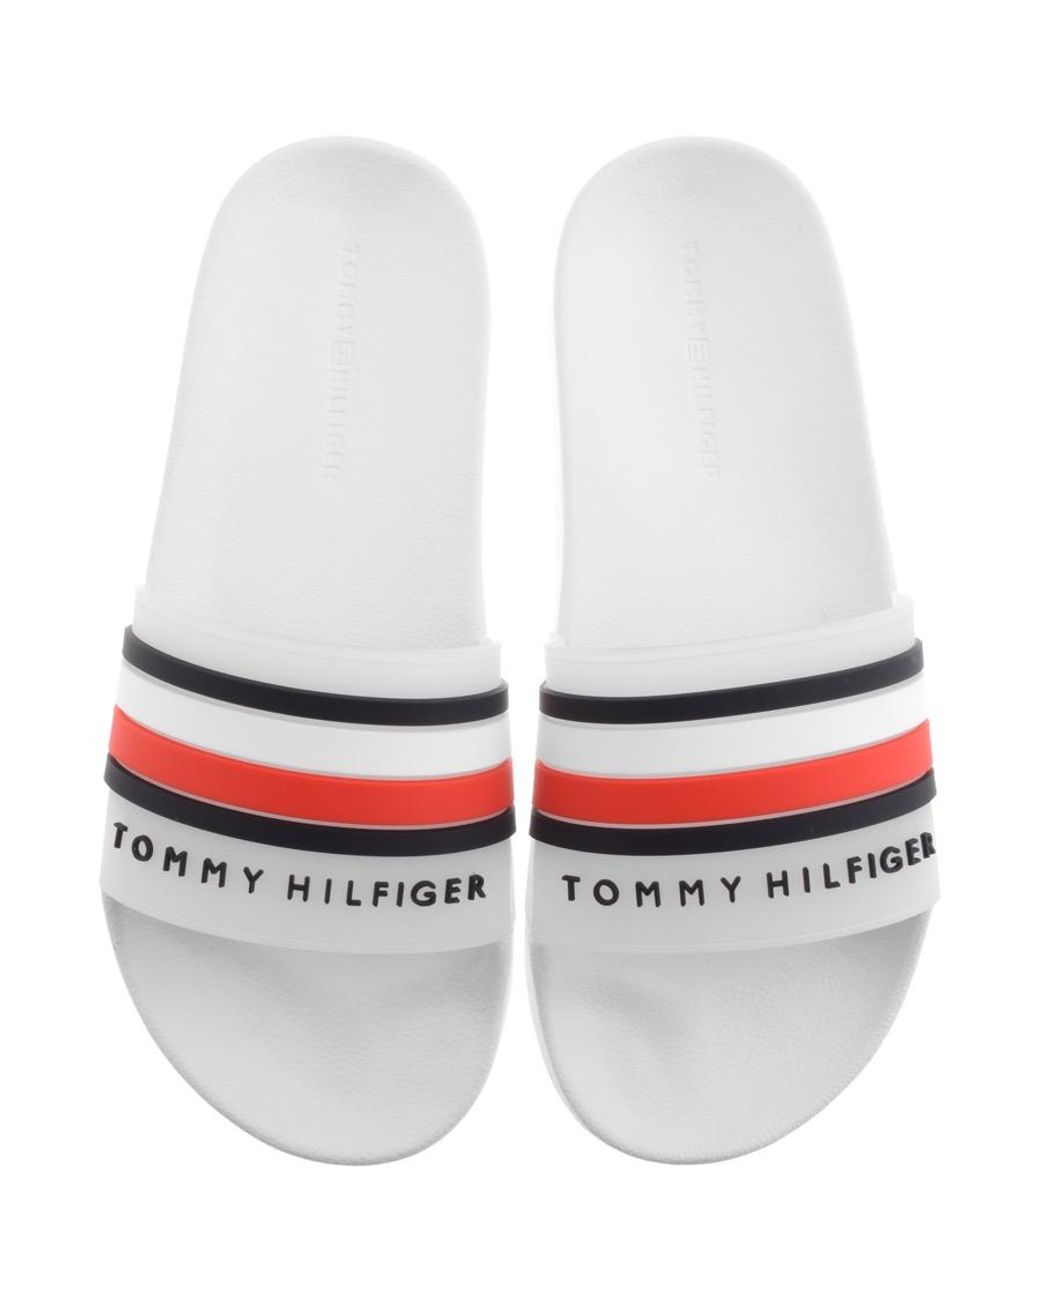 Tommy Hilfiger Rubber Pool Sliders in White for Men - Lyst